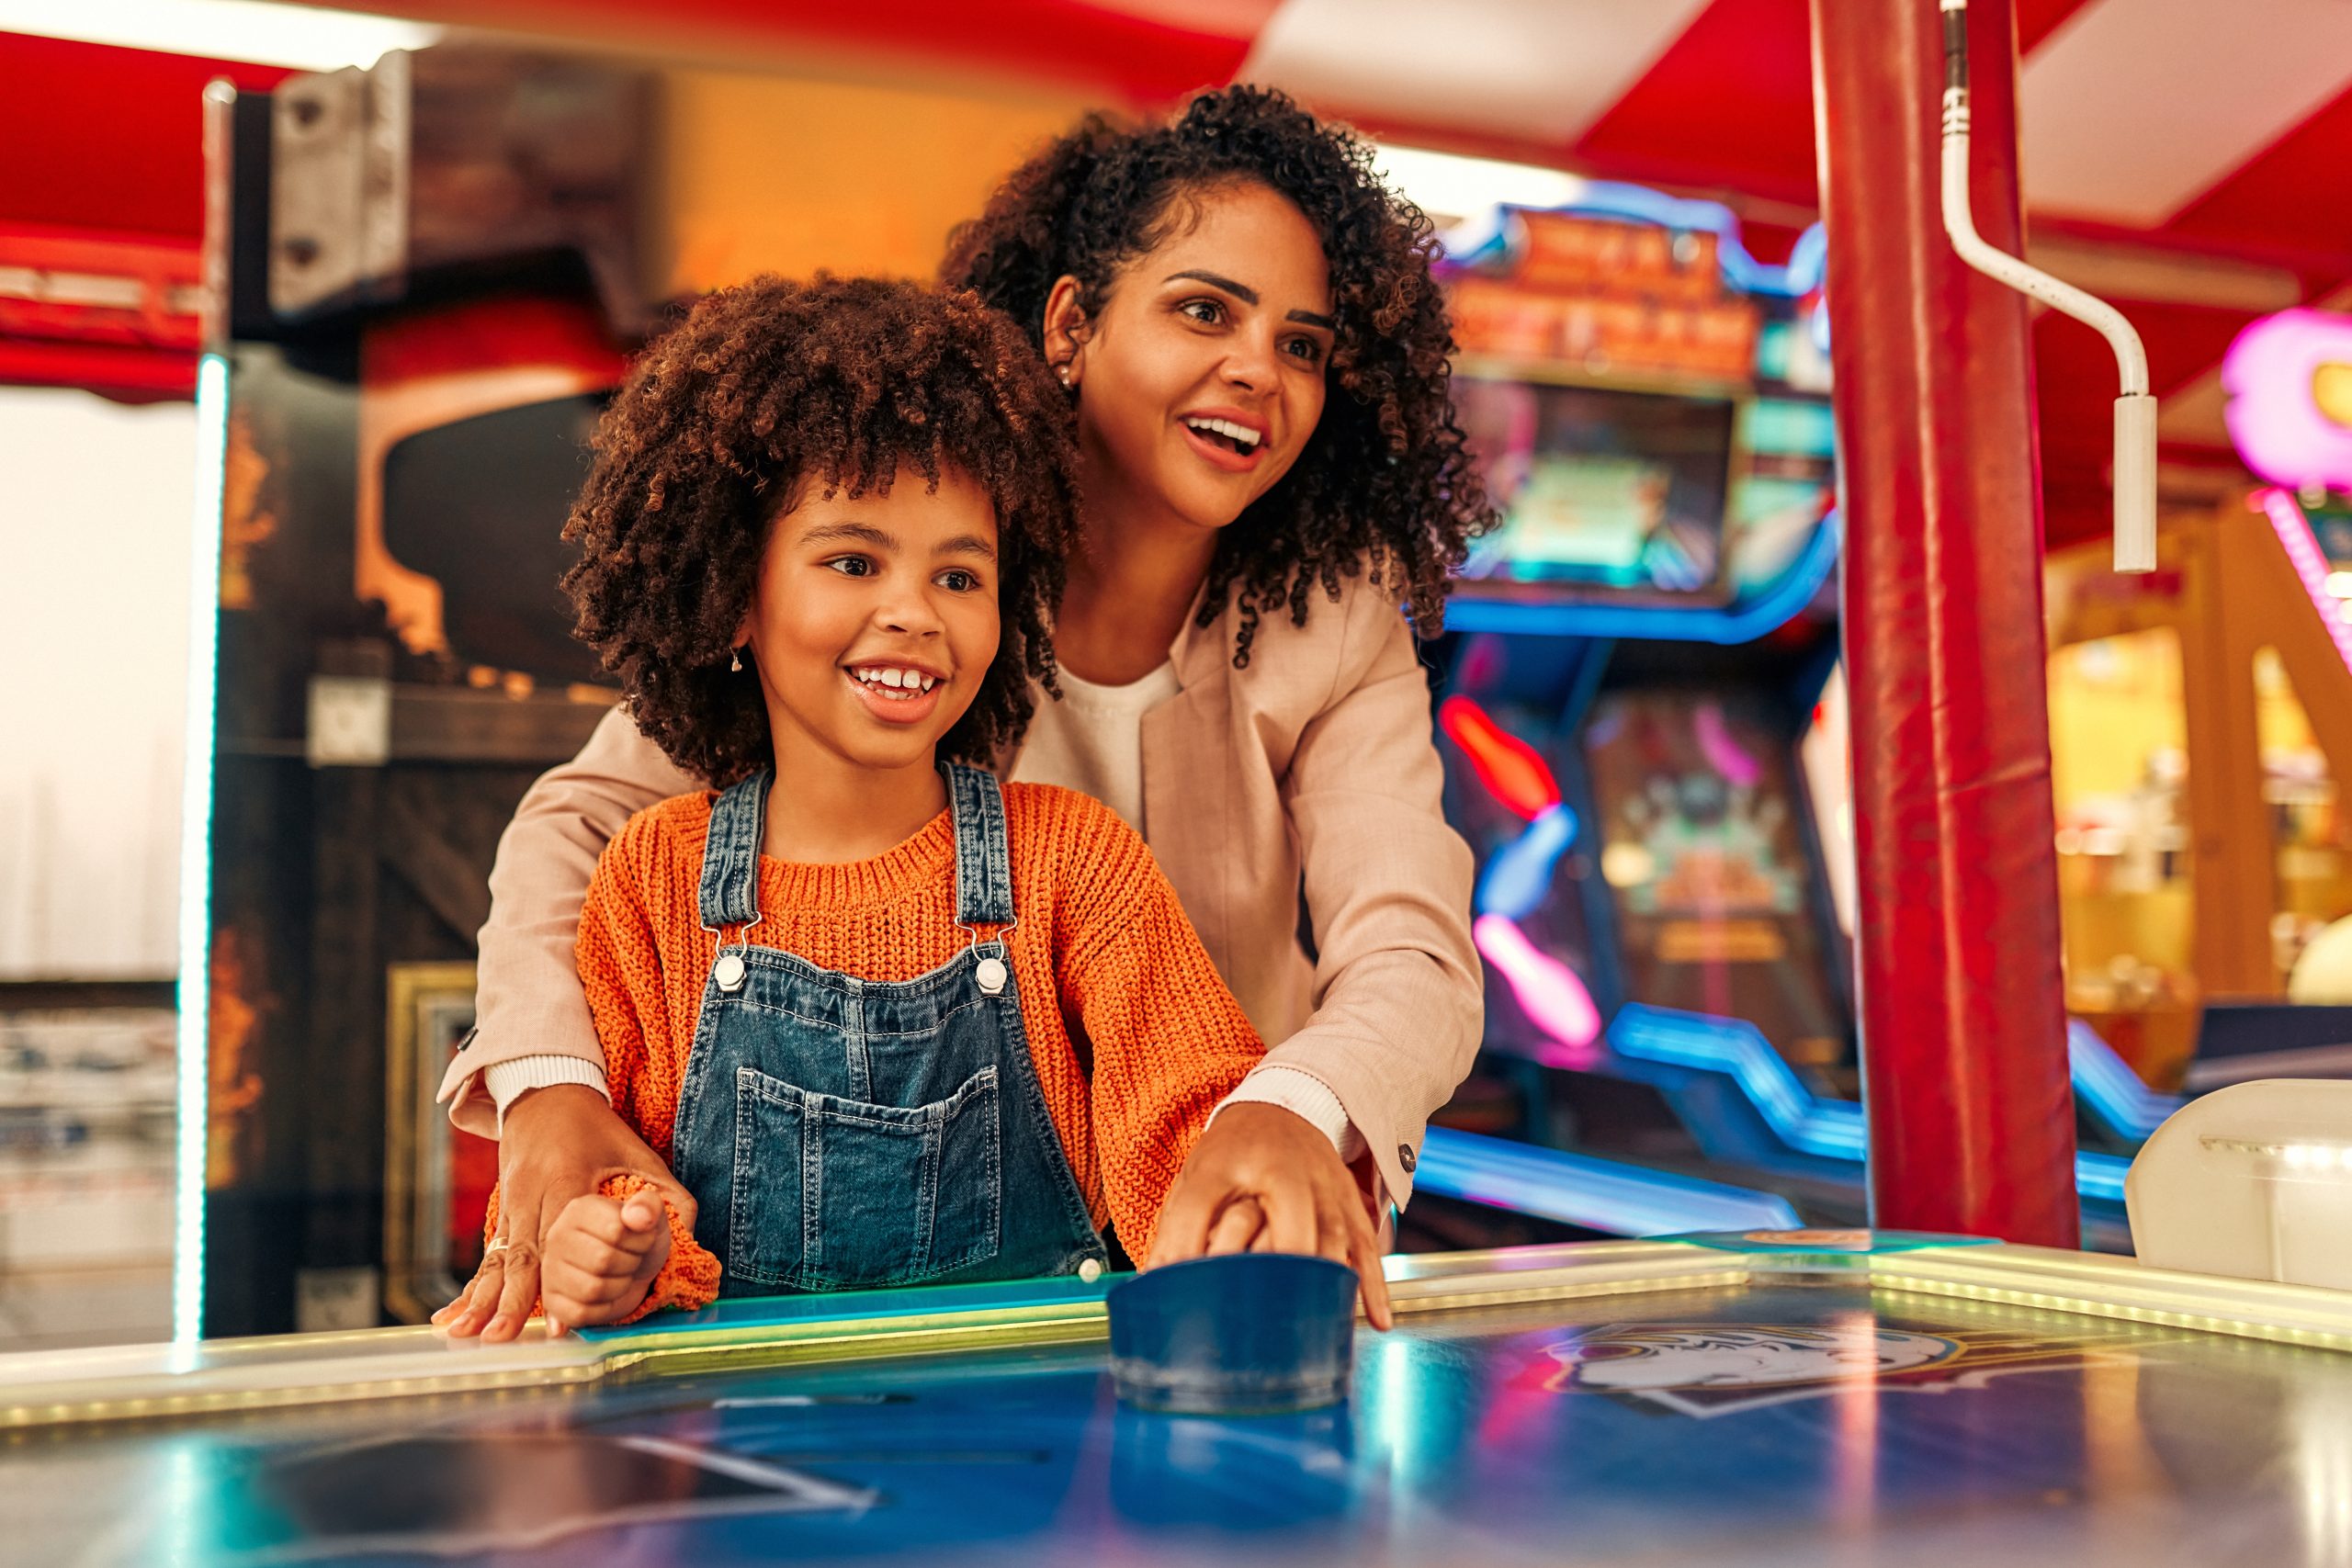 A cute child with with her mother playing air hockey